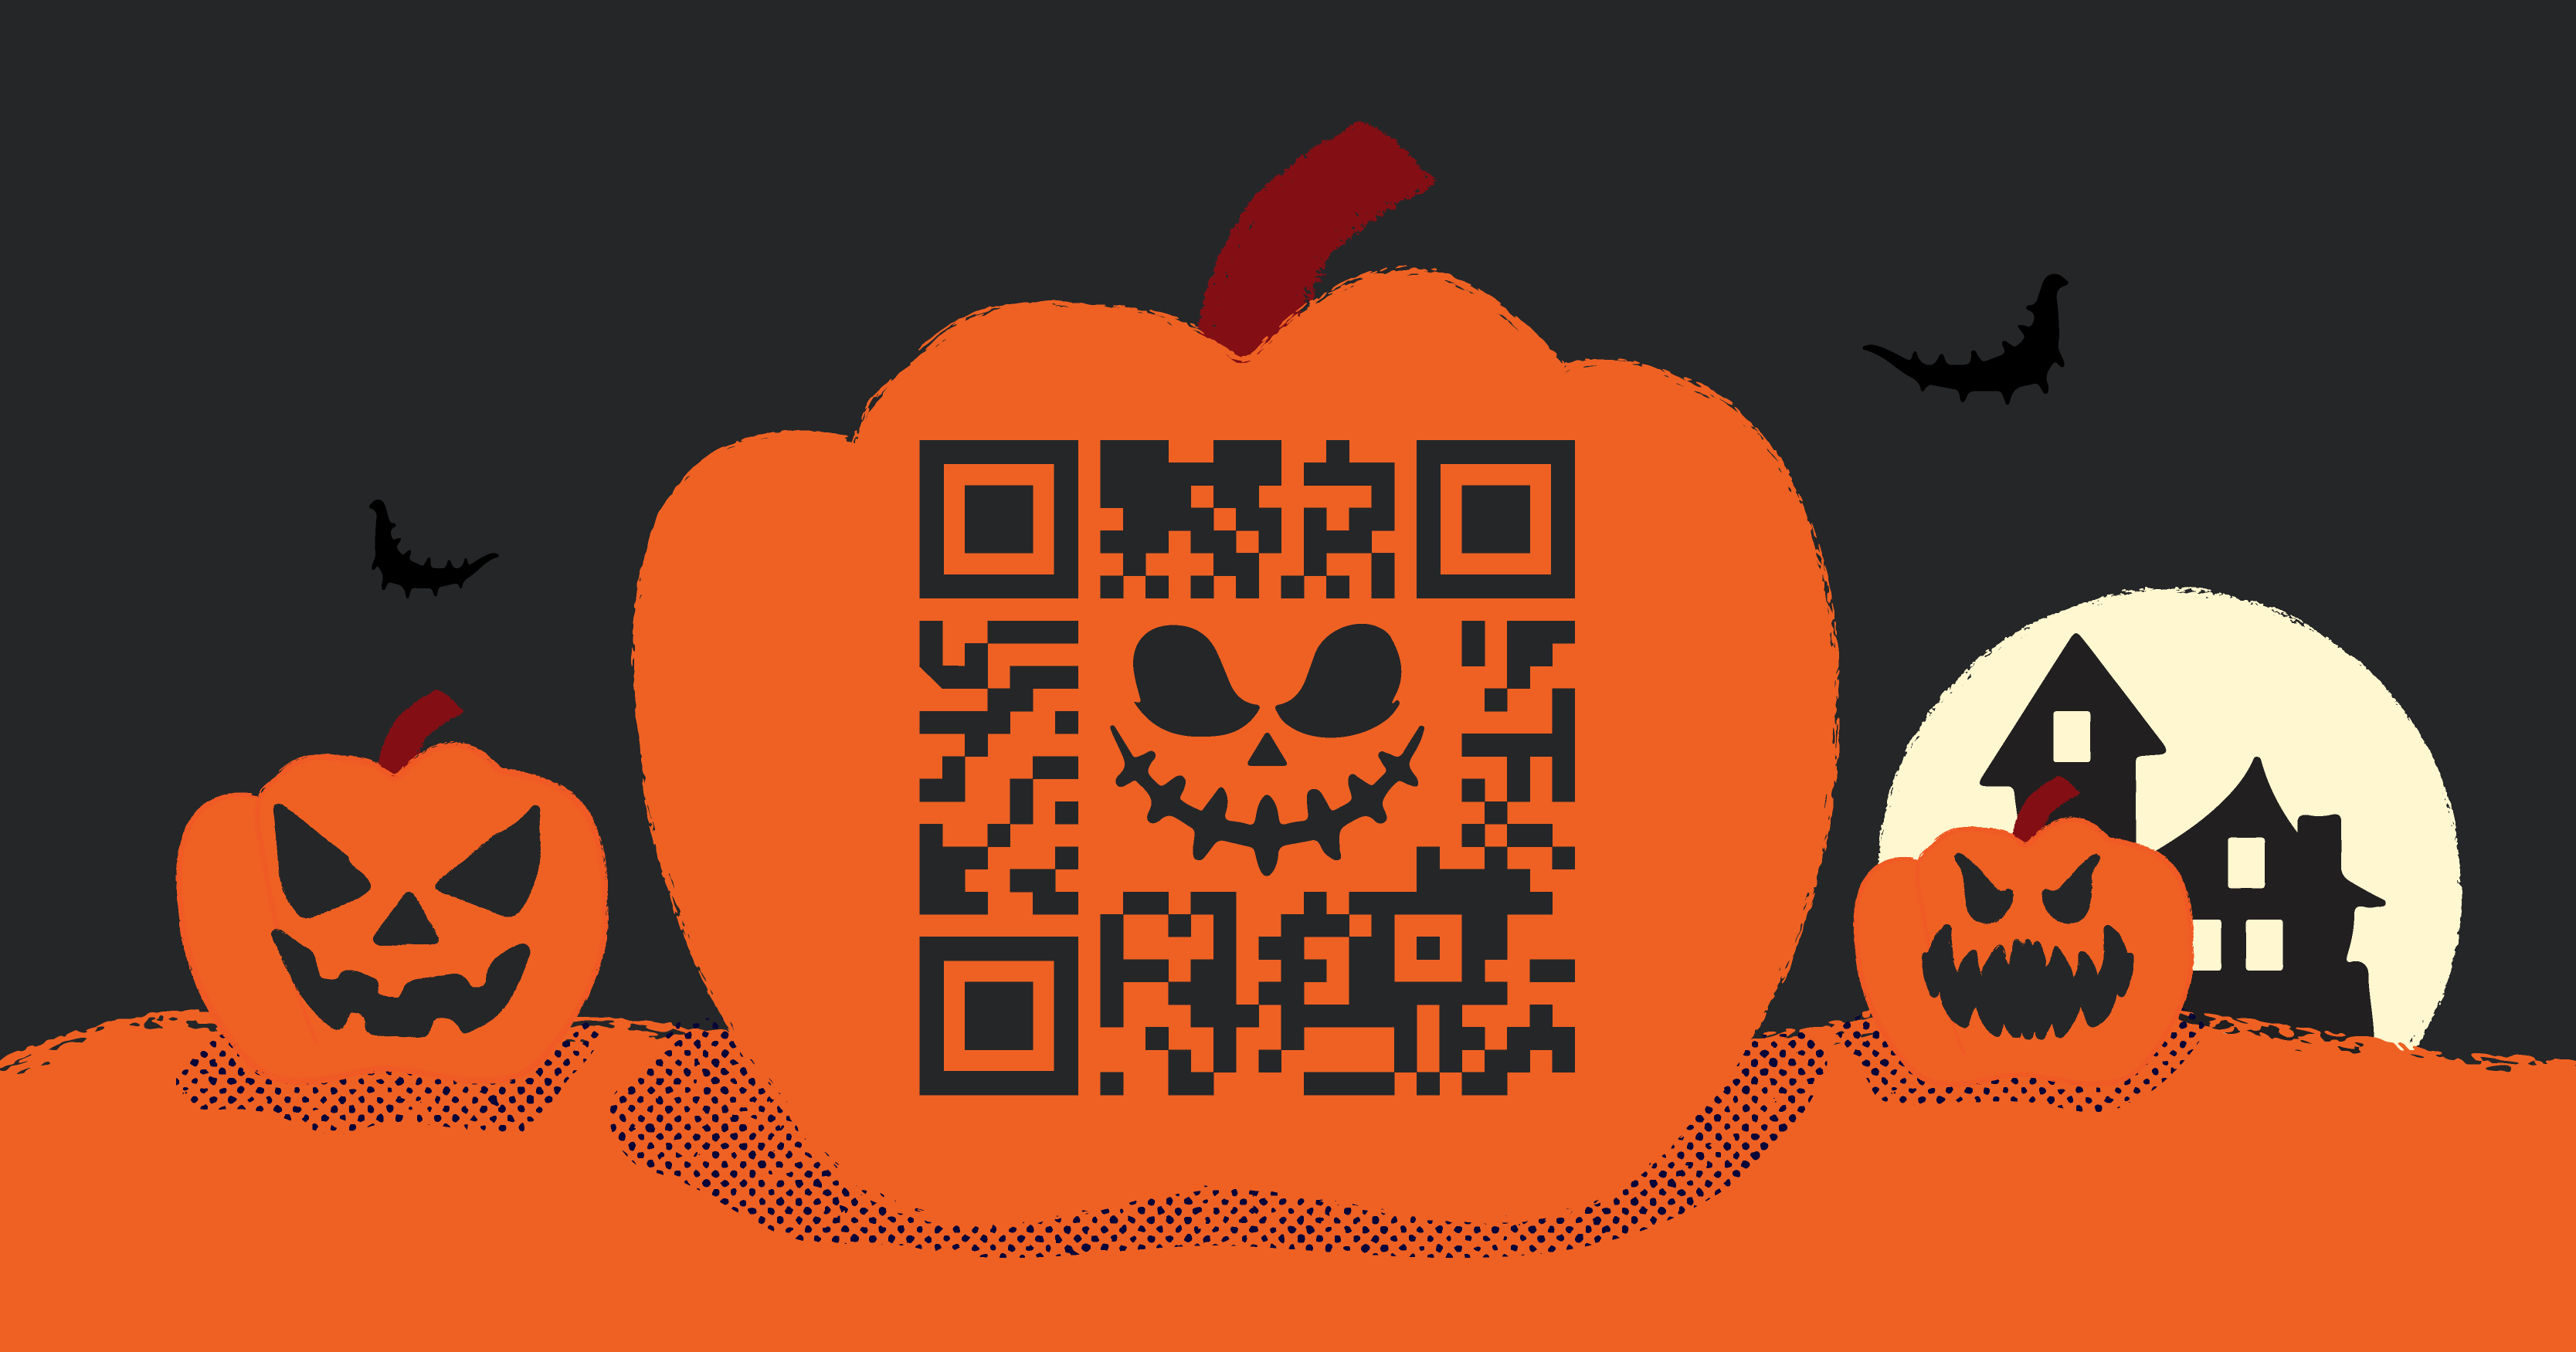 Jack-o'-lantern with QR code on it, jack-o'-lanterns and haunted house in background